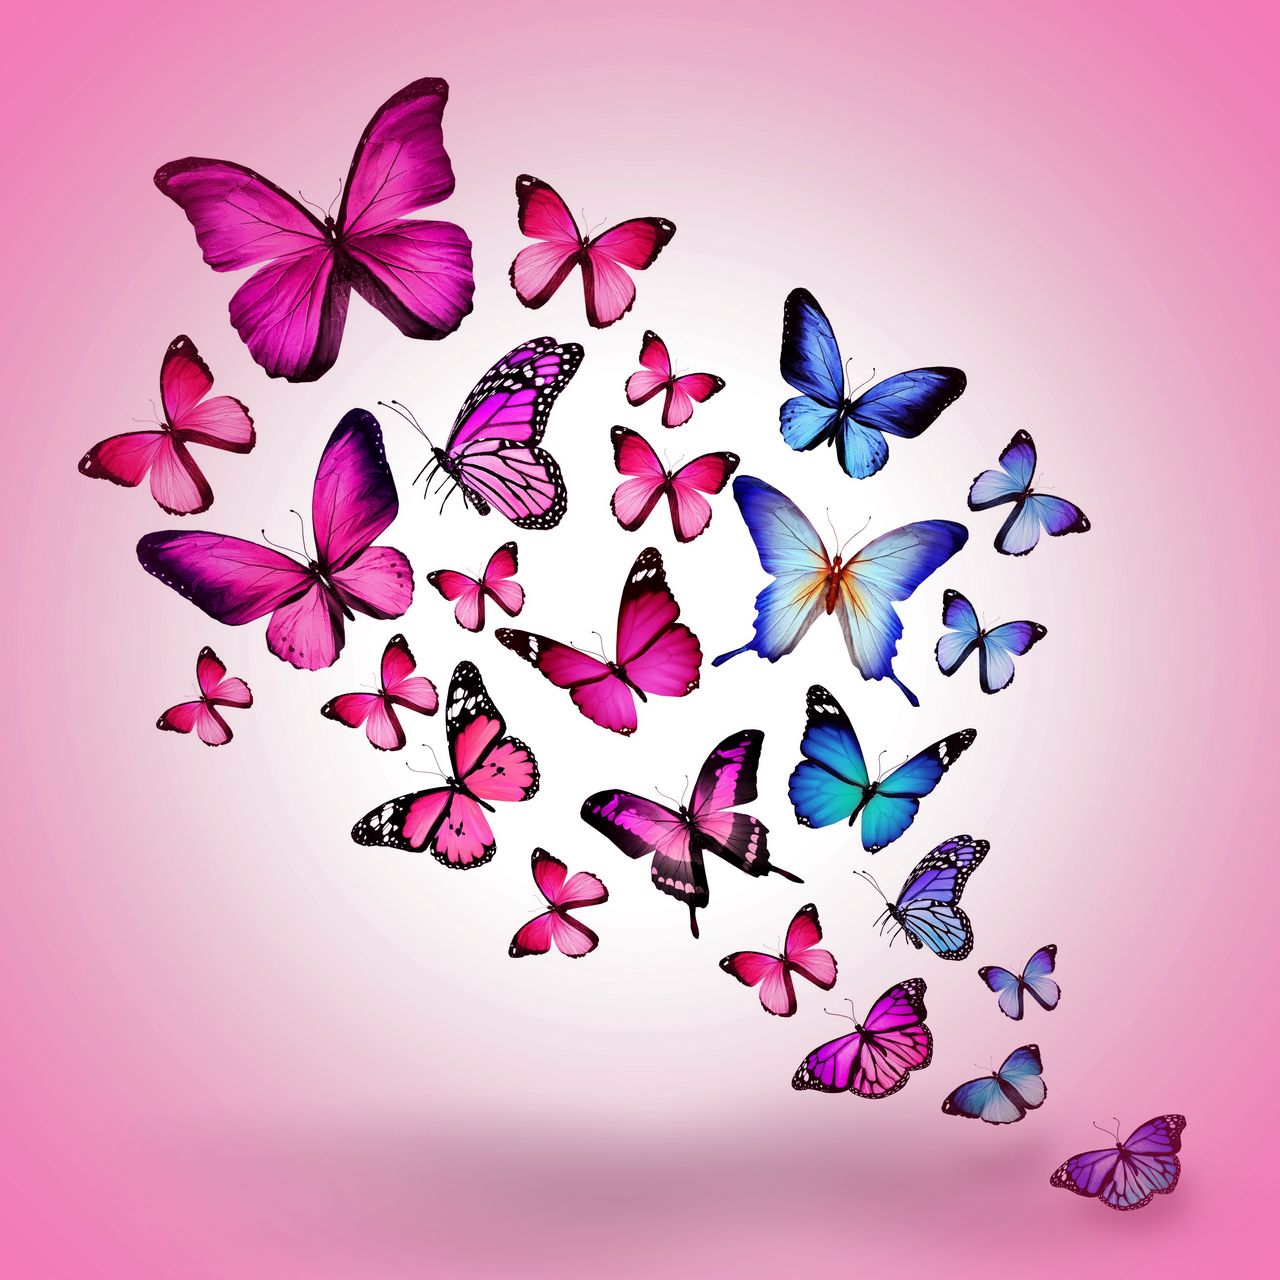 Download wallpaper 1280x1280 butterfly, drawing, flying, colorful, background, pink ipad, ipad ipad mini for parallax HD background